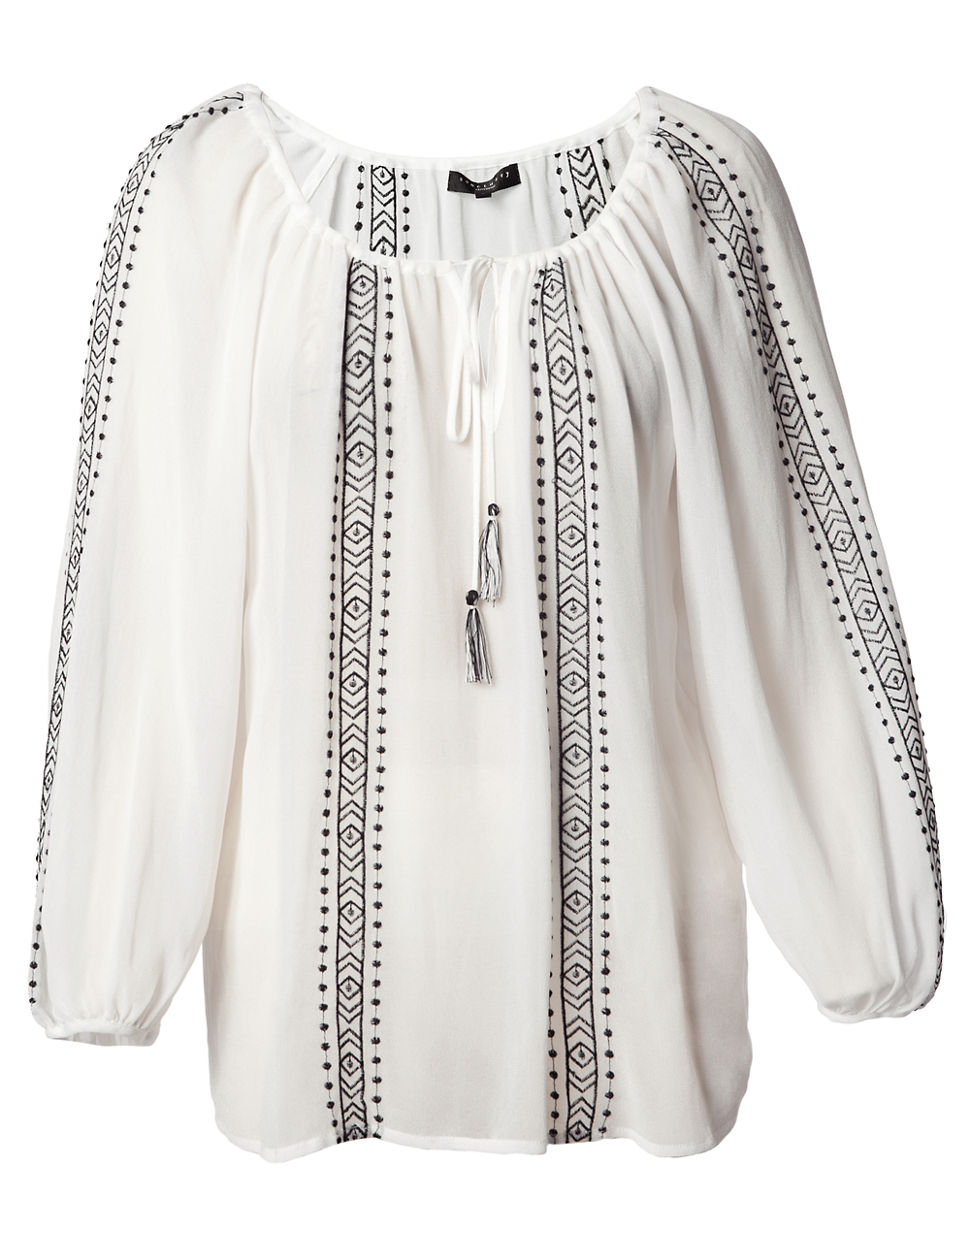 Sanctuary Boho Embroidered Peasant Top in White - Lyst